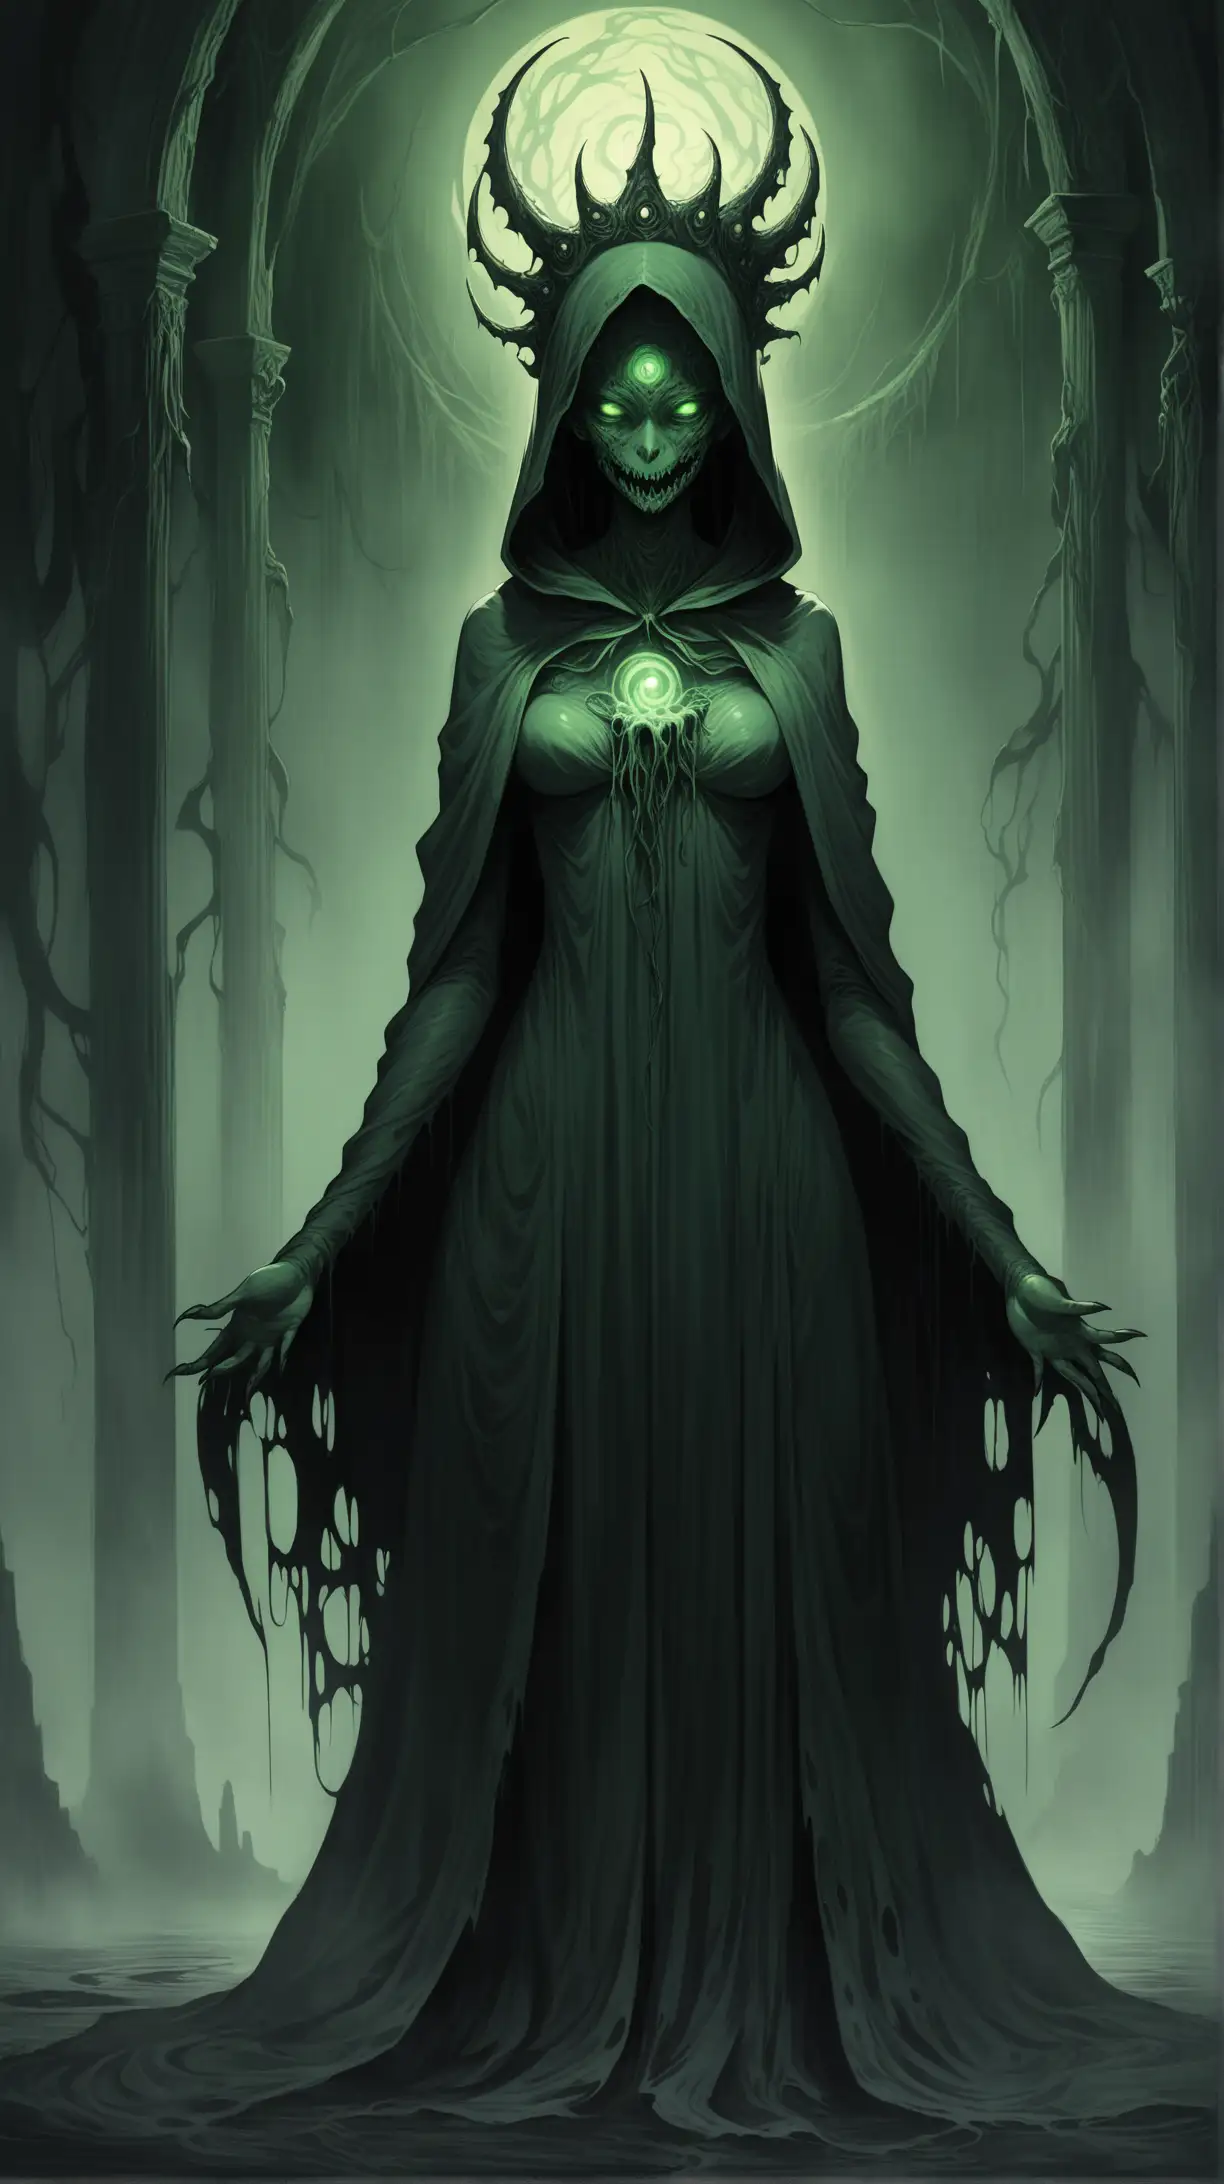 "Create a chilling full-bodied illustration of a Lovecraftian-inspired female deity draped in a tattered, dark green hooded cloak. Blend the cosmic horror of Lovecraft's mythos with the terrifying imagery of illustrative horror.

Detail the deity's grotesque and imposing form, exuding an aura of dread and malevolence as the self-proclaimed queen of eldritch gods. Her body contorts and mutates unnaturally beneath the cloak, with long, sinewy limbs stretching out in a wiry and muscular physique. The hood obscures her face, leaving only the glint of six glowing green eyes and the gleam of razor-sharp, jagged teeth visible in the shadows, devoid of lips.

Adorn her head with a glowing green halo, casting an eerie light around her twisted form and adding to her menacing presence.

Capture the essence of cosmic horror in her monstrous visage, conveying a sense of ancient malevolence and eldritch power beyond mortal comprehension. Perhaps she is a manifestation of the unknowable horrors lurking beyond the veil of reality, her presence evoking both fascination and terror in equal measure.

Set the deity against a backdrop of twisted and otherworldly landscapes, shrouded in mist and shadow, to enhance the atmosphere of dread and foreboding. Infuse the artwork with the dynamic and expressive qualities of illustrative horror, using exaggerated features, grotesque details, and dramatic lighting to evoke a sense of terror and unease.

Challenge artists to explore the intersection of Lovecraftian horror and illustrative horror aesthetics, inviting them to create a god-like entity that embodies the eldritch terror of the unknown while emphasizing the mysterious and sinister nature of her obscured form. Tags: dark, psychological, Lovecraftian, horror, deity, anime, monstrous, regal."